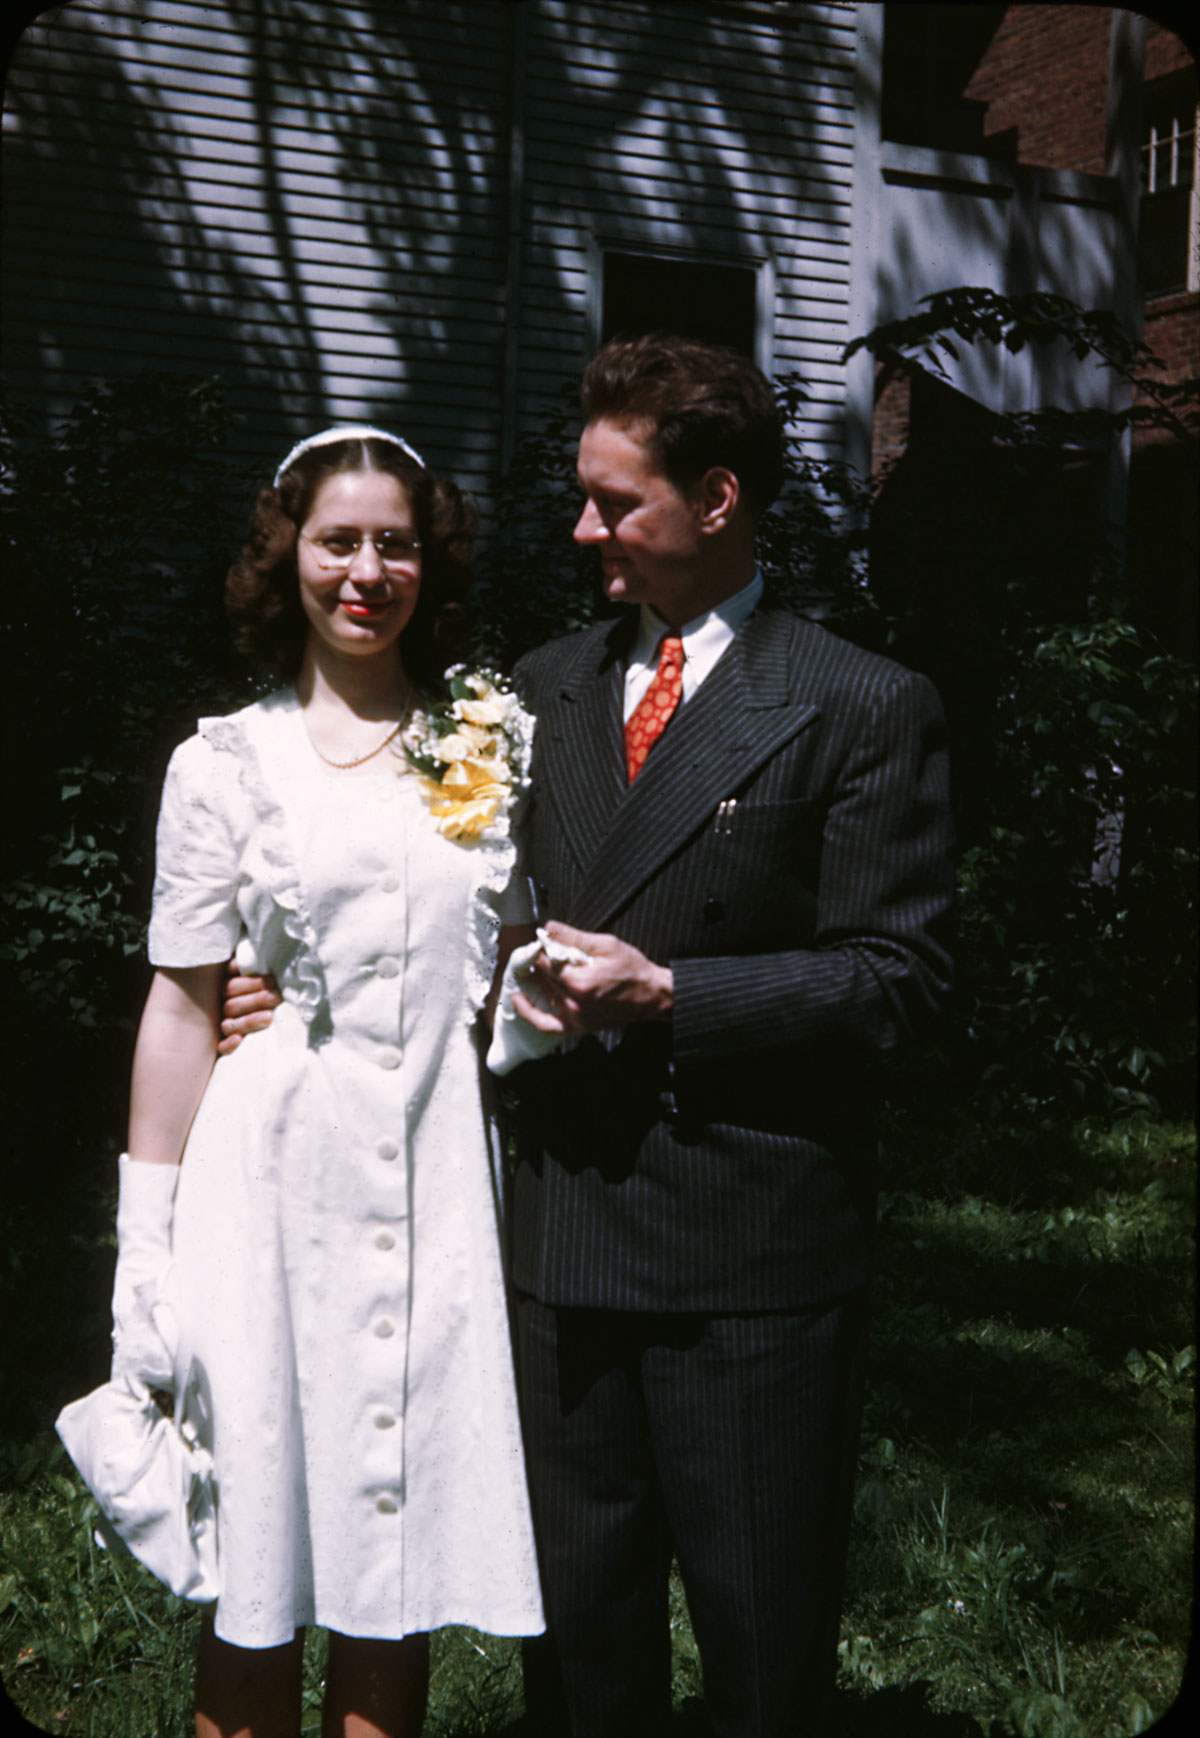 My parents, Charles and Harriet (Tyler) Miller on their wedding day, June 11, 1946. Cambridge, MA. Spiffy suit, Dad! Update: Found and posted the original Kodachrome slide - apparently Kodachrome prints were not as stable.